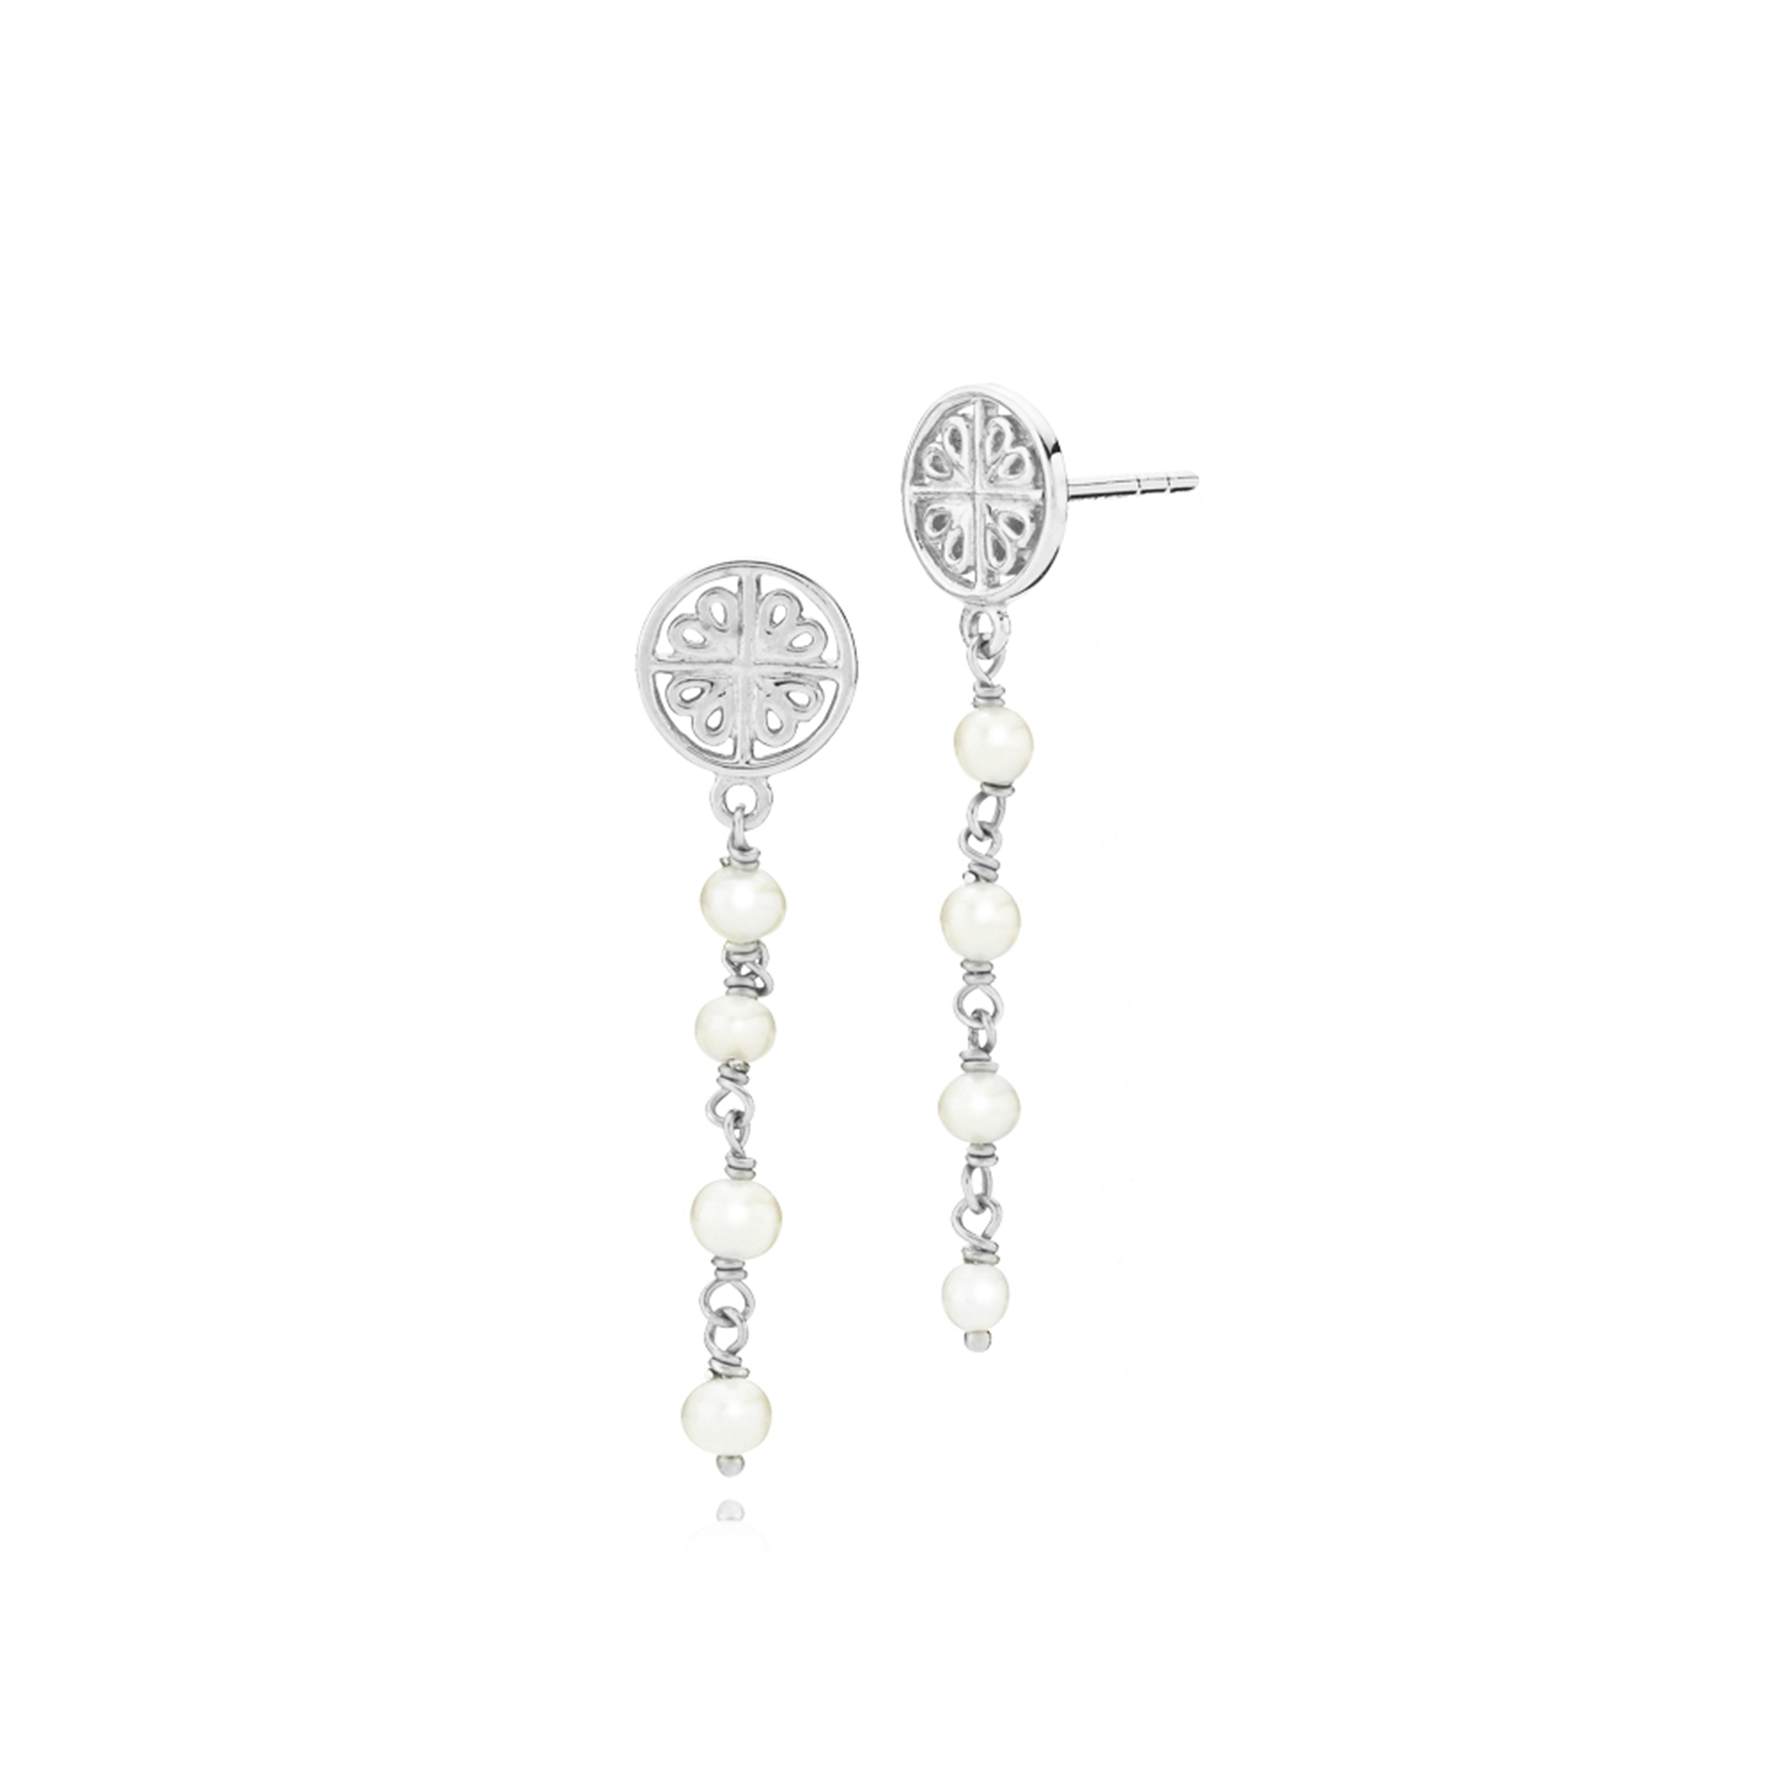 Balance Earrings With Pearl from Sistie in Silver Sterling 925|Freshwater Pearl